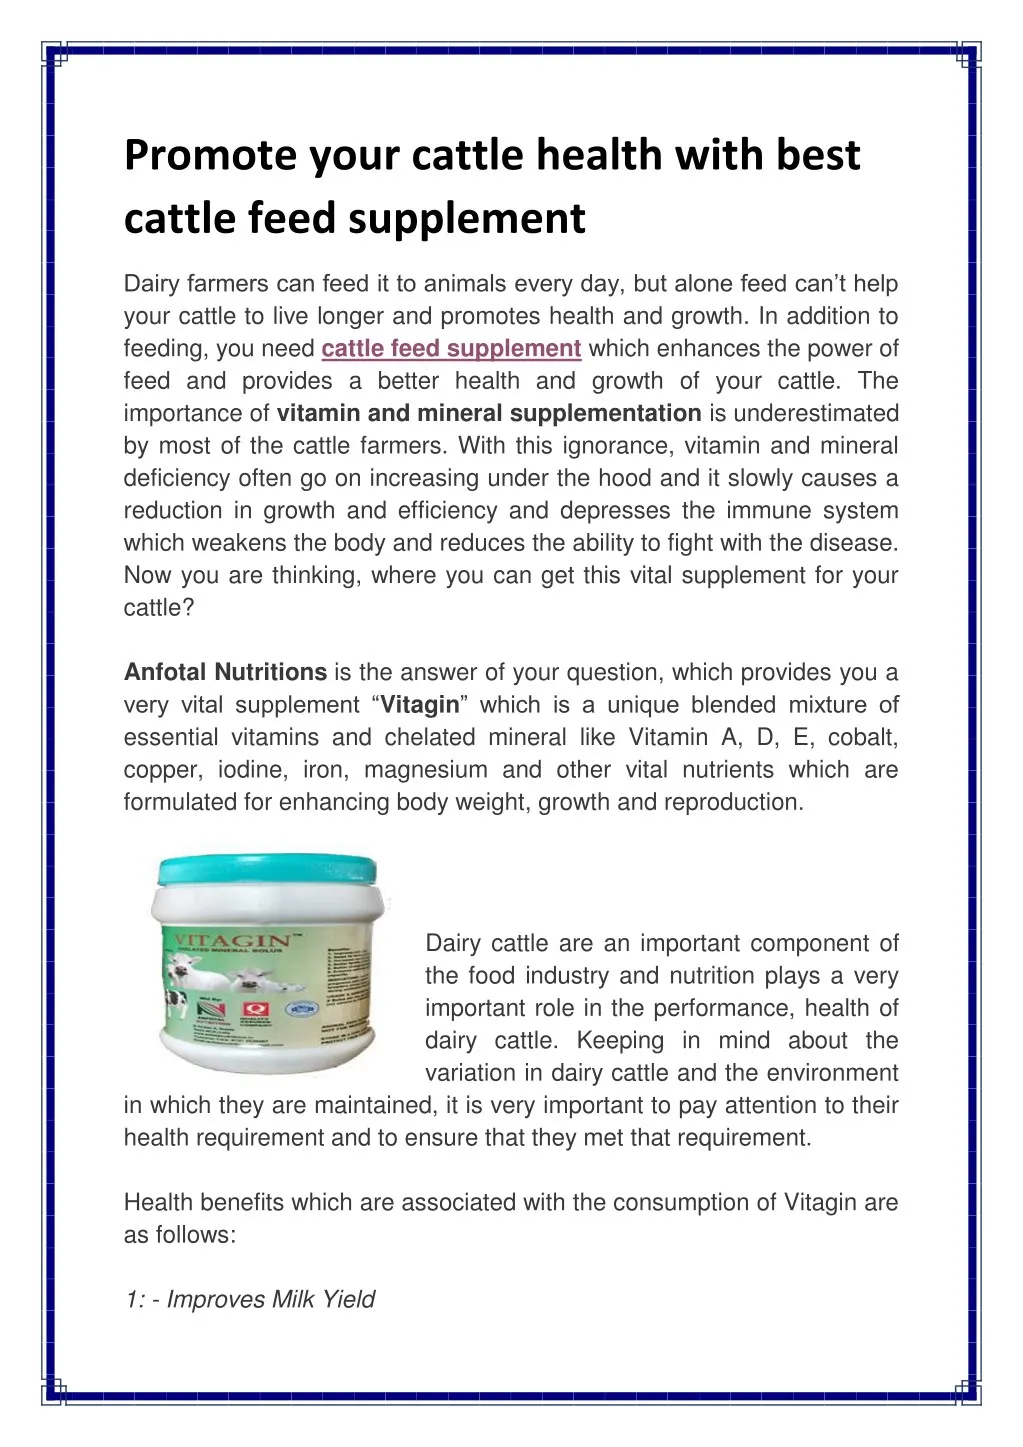 promote your cattle health with best cattle feed